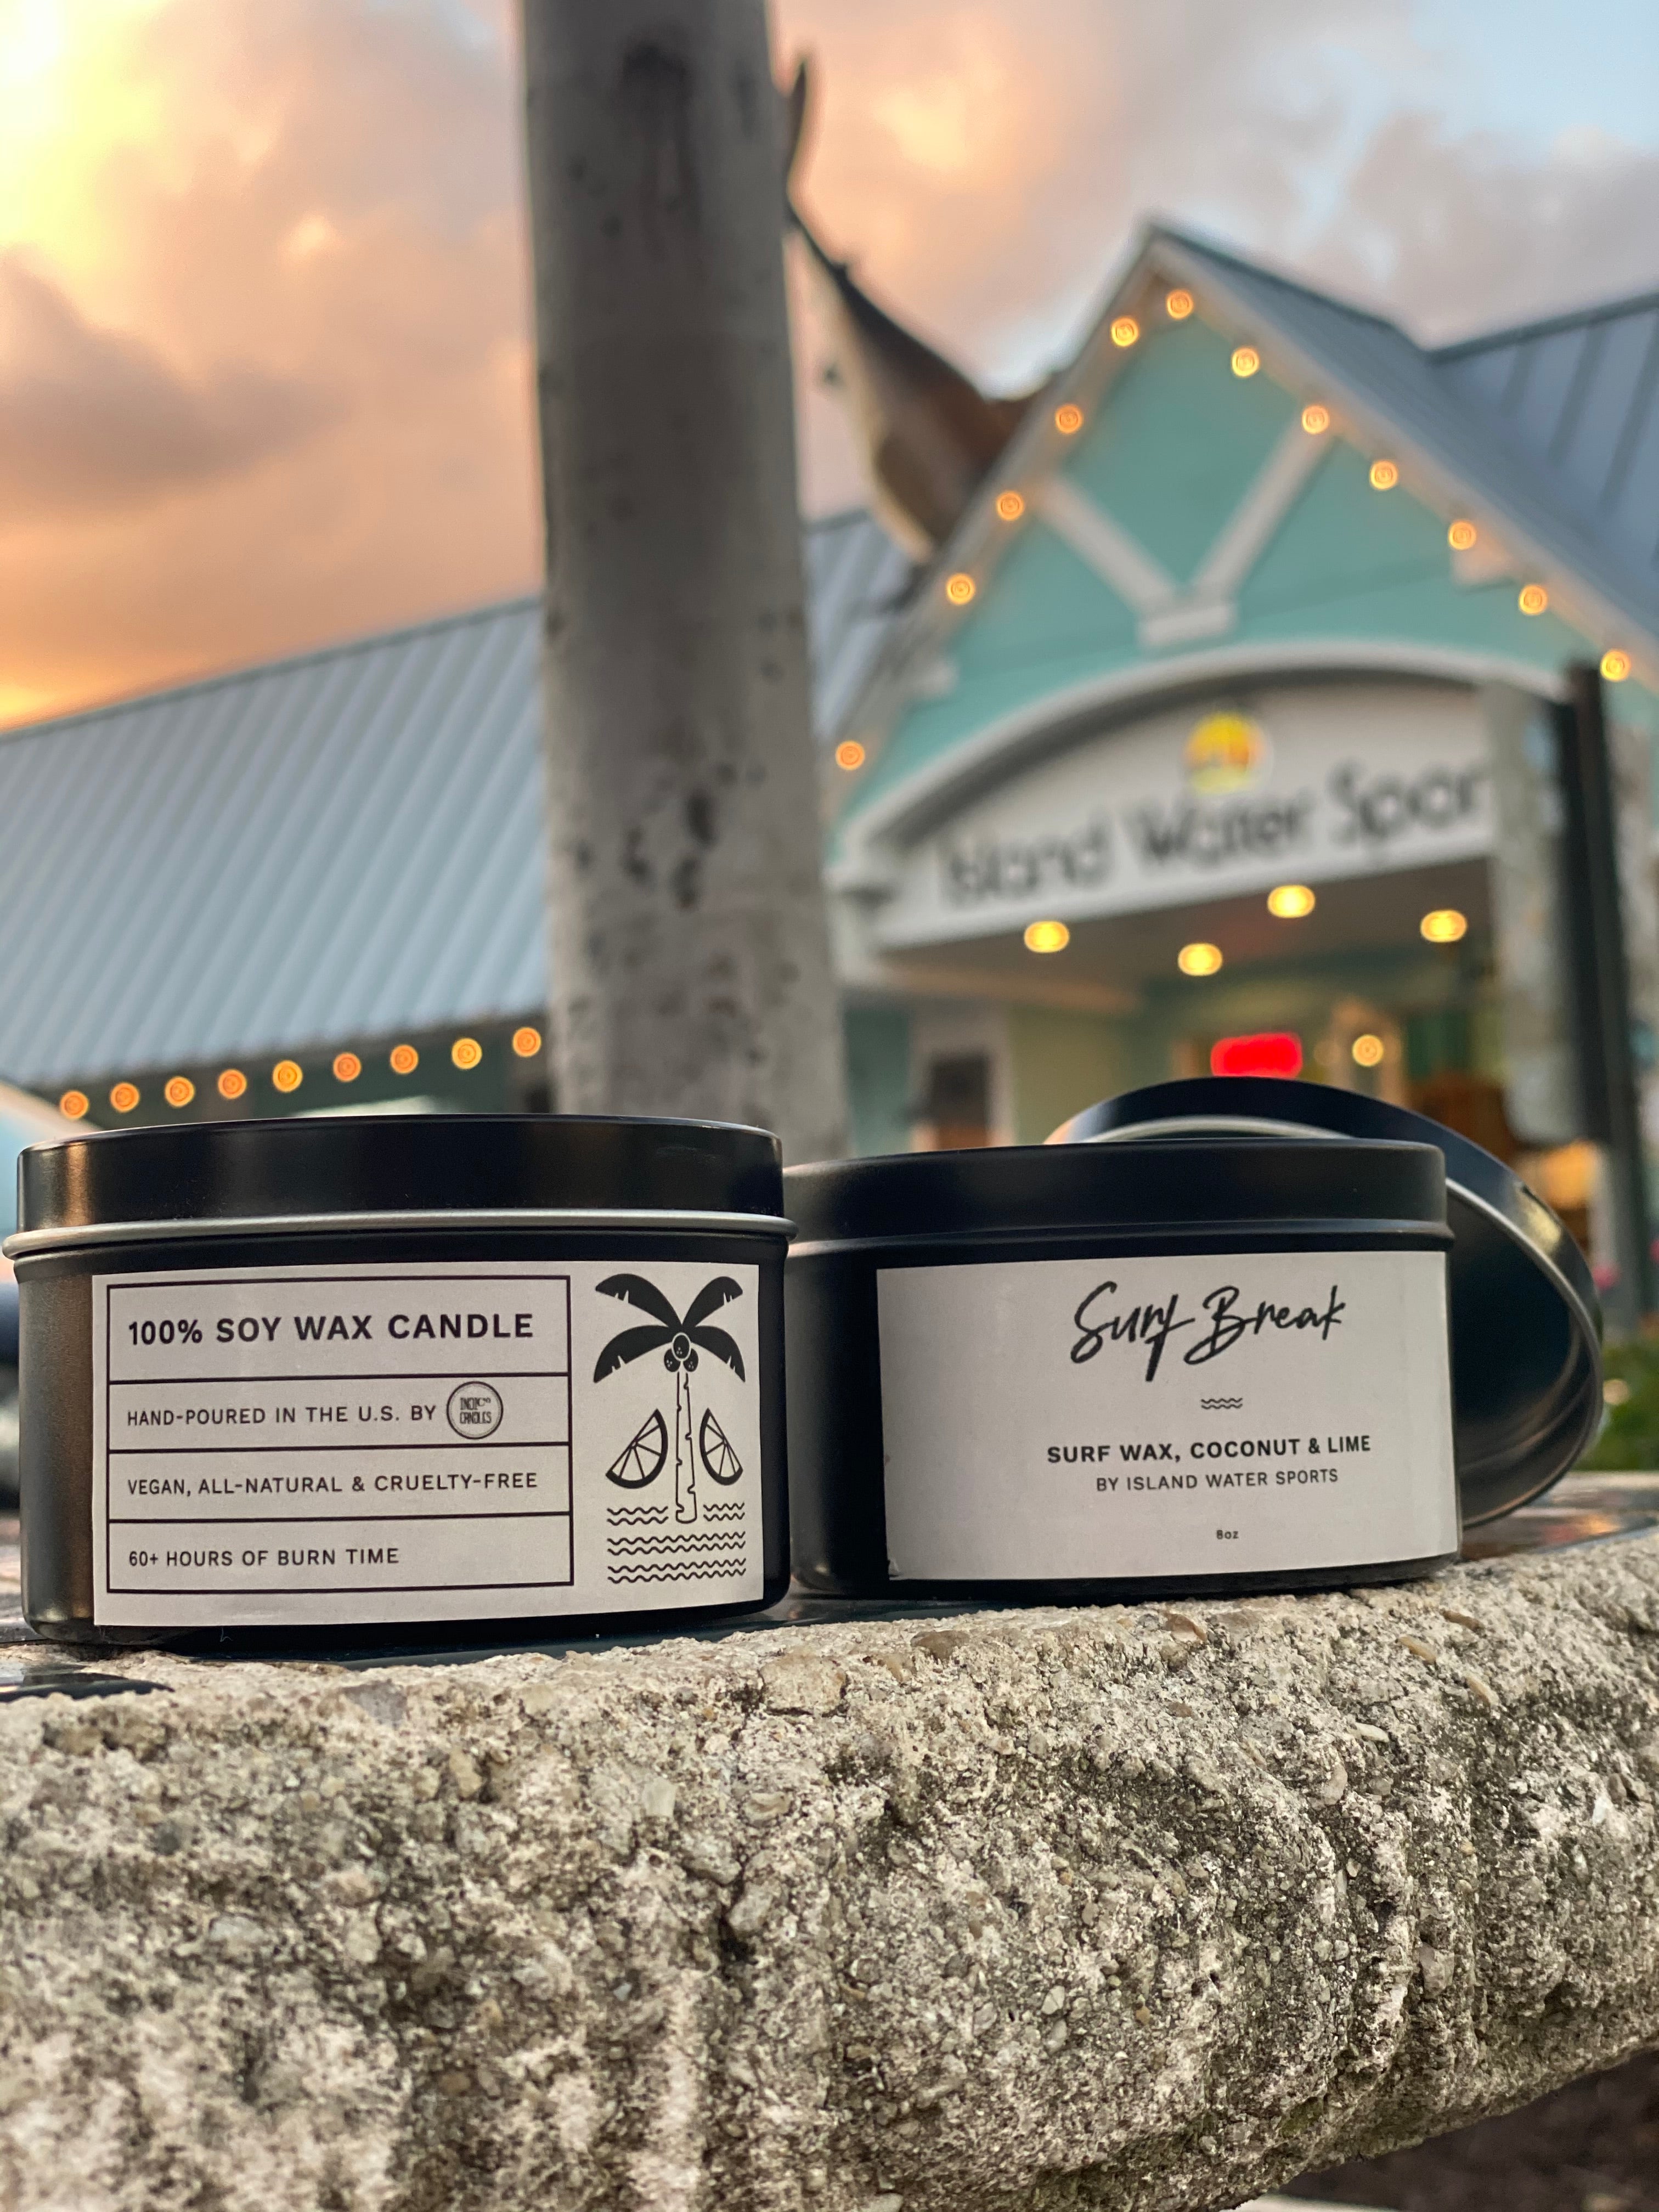 Surf Break Candle surf wax and coconut lime  CoconutLime 8oz